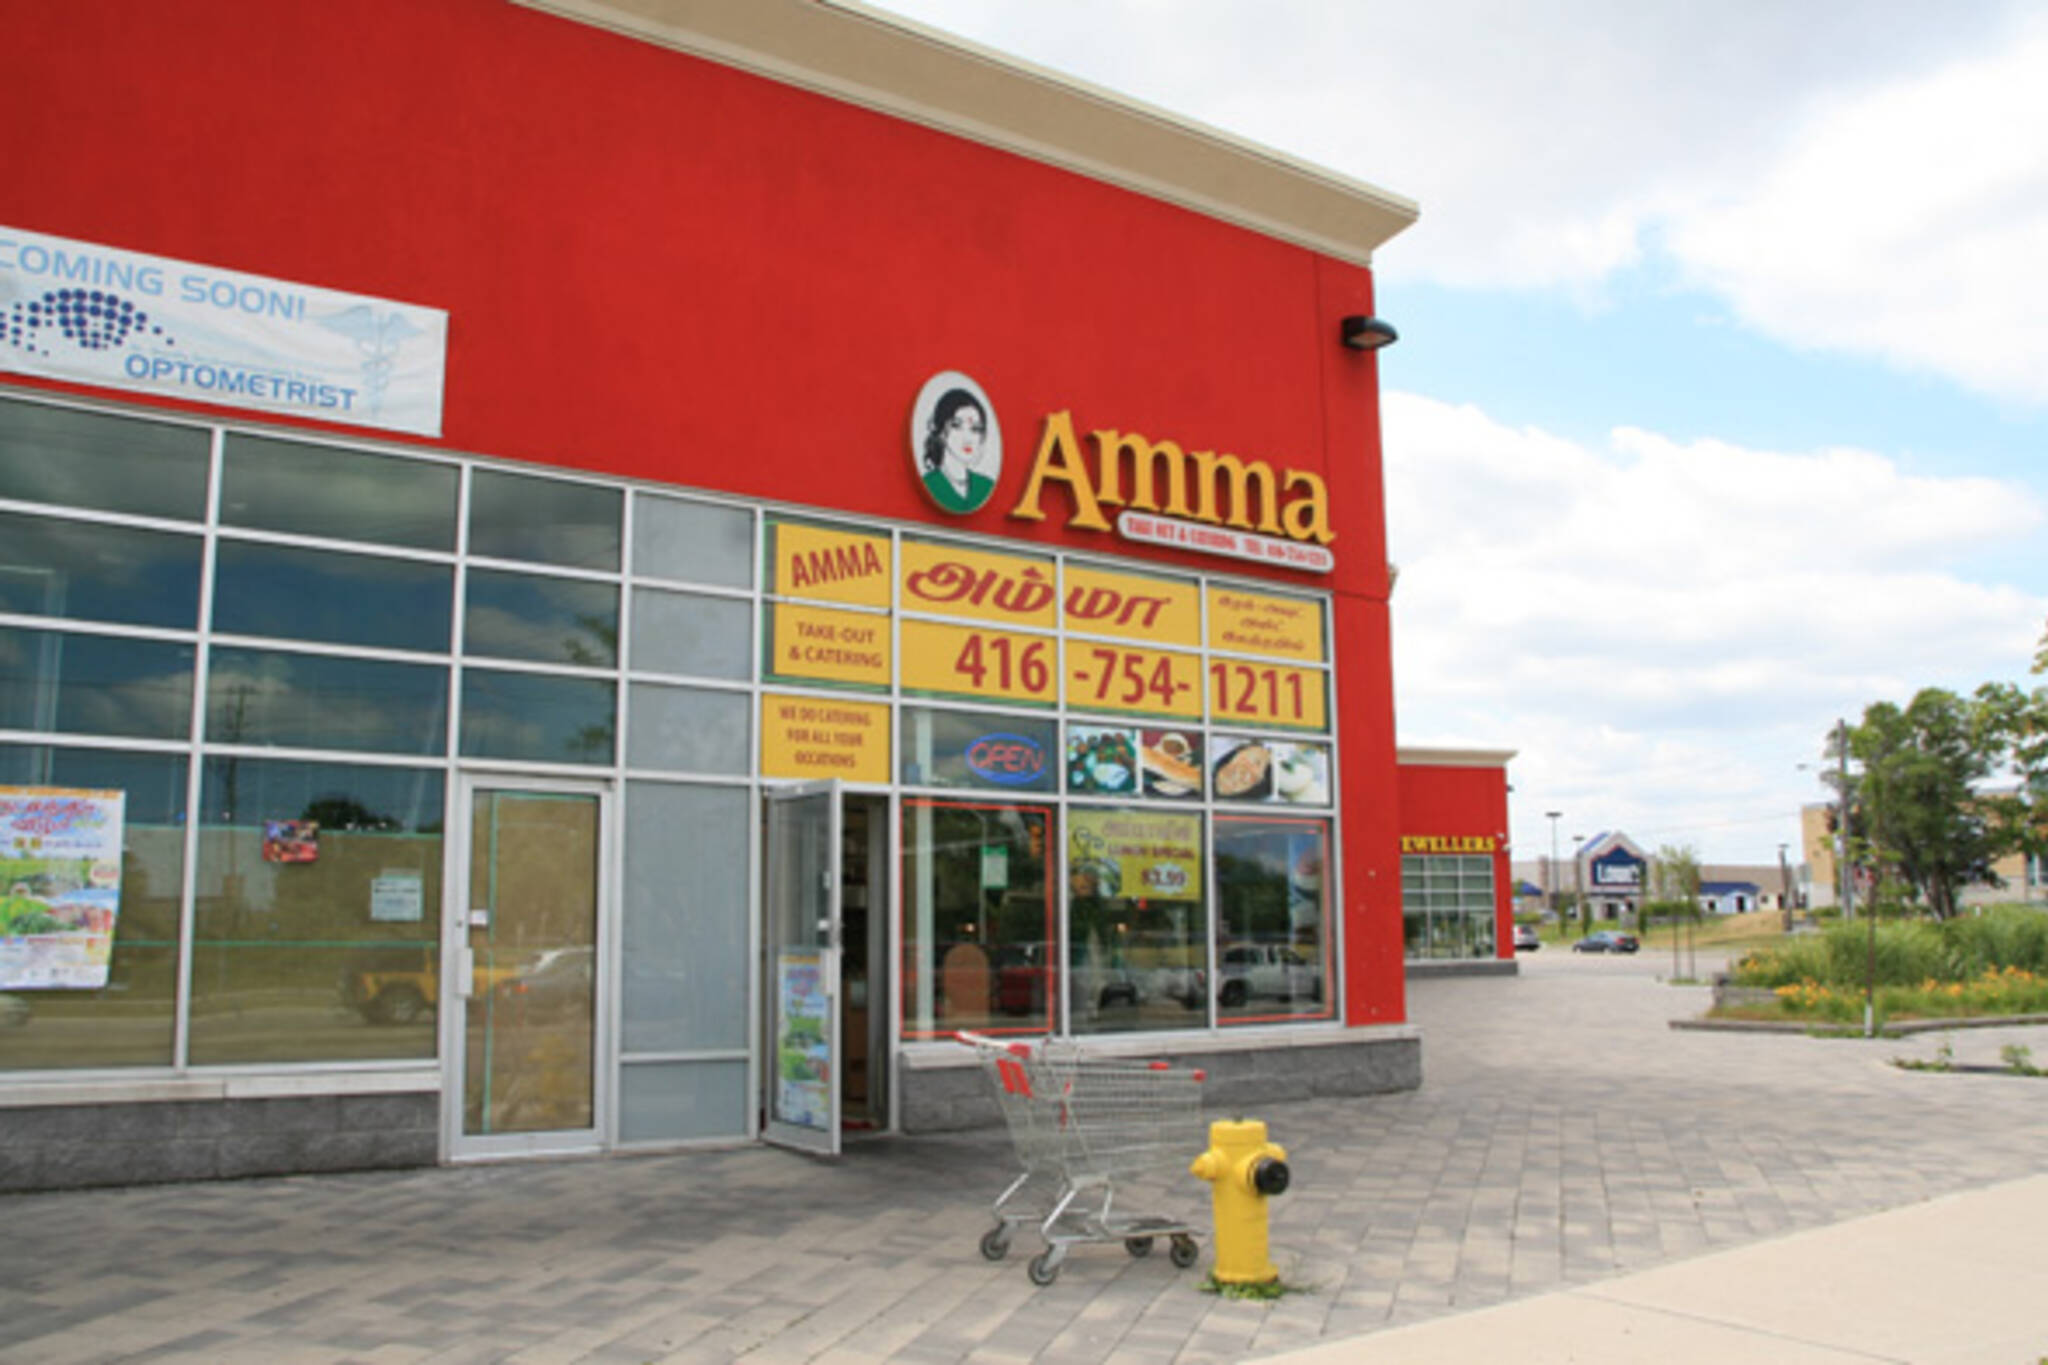 Amma take-out and catering Toronto